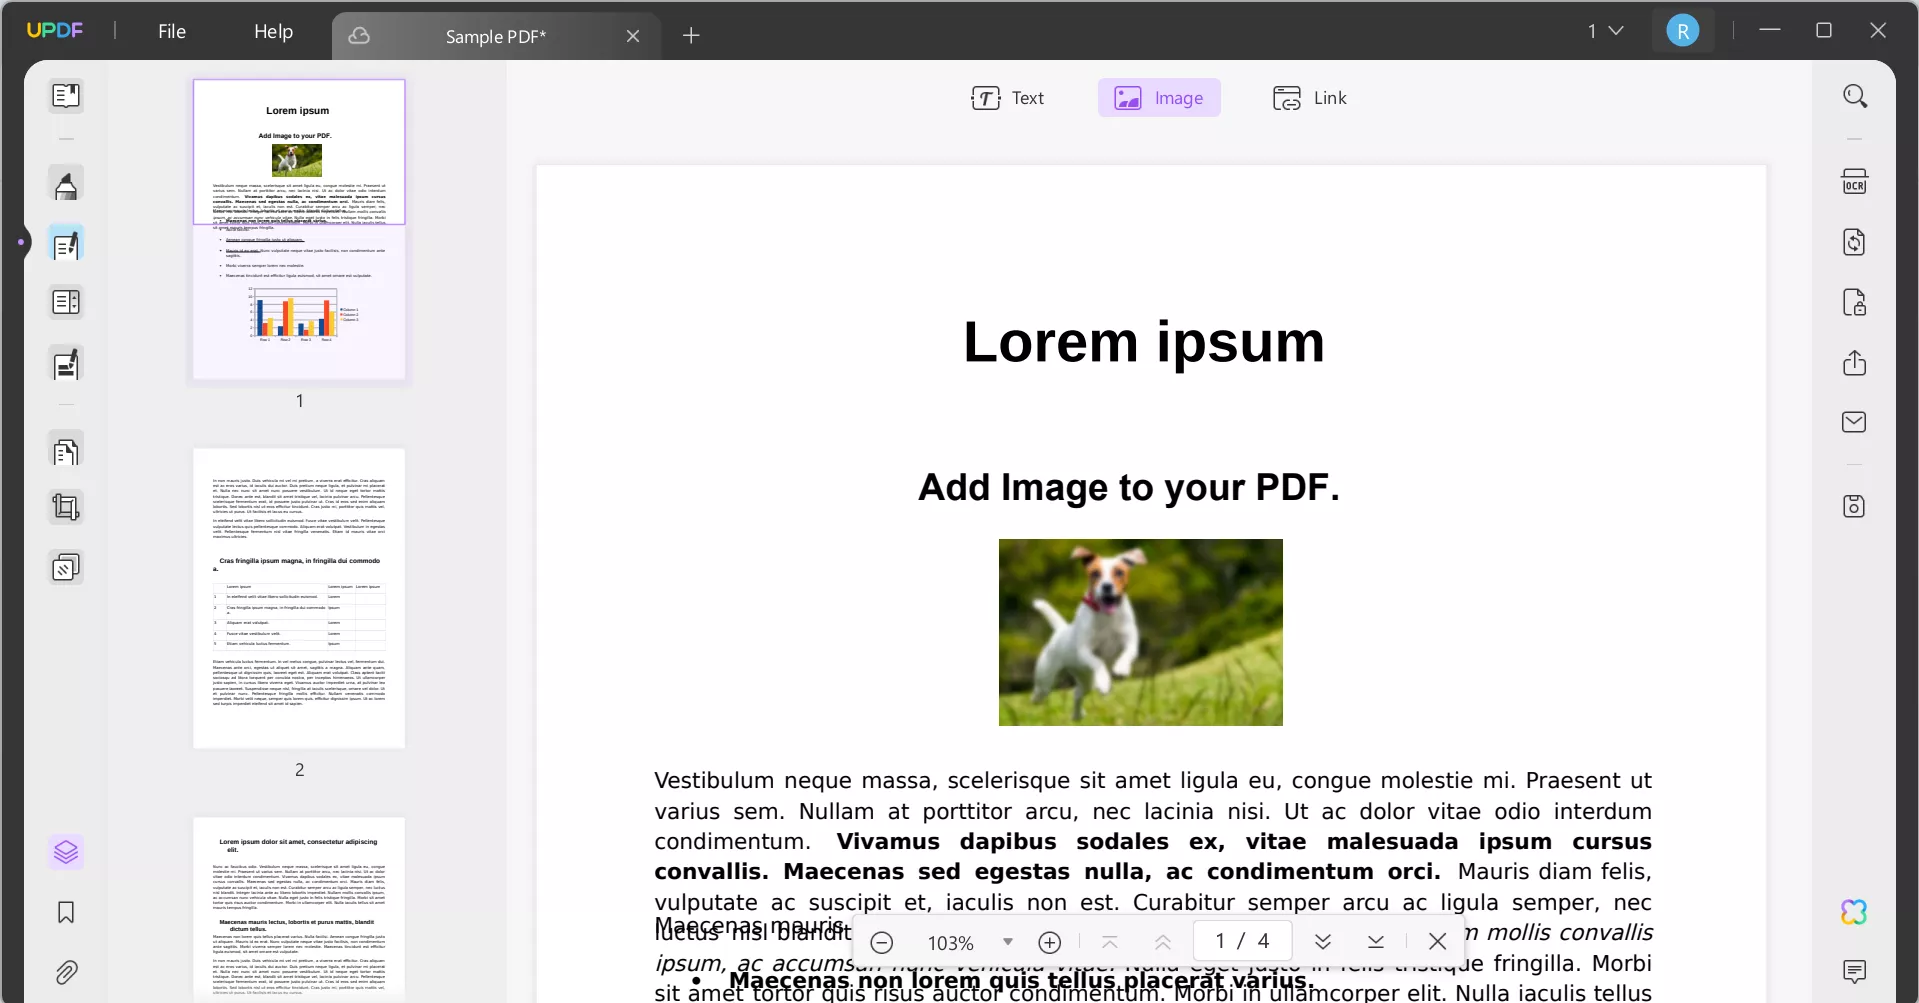  add image to your pdf using the image option with UPDF